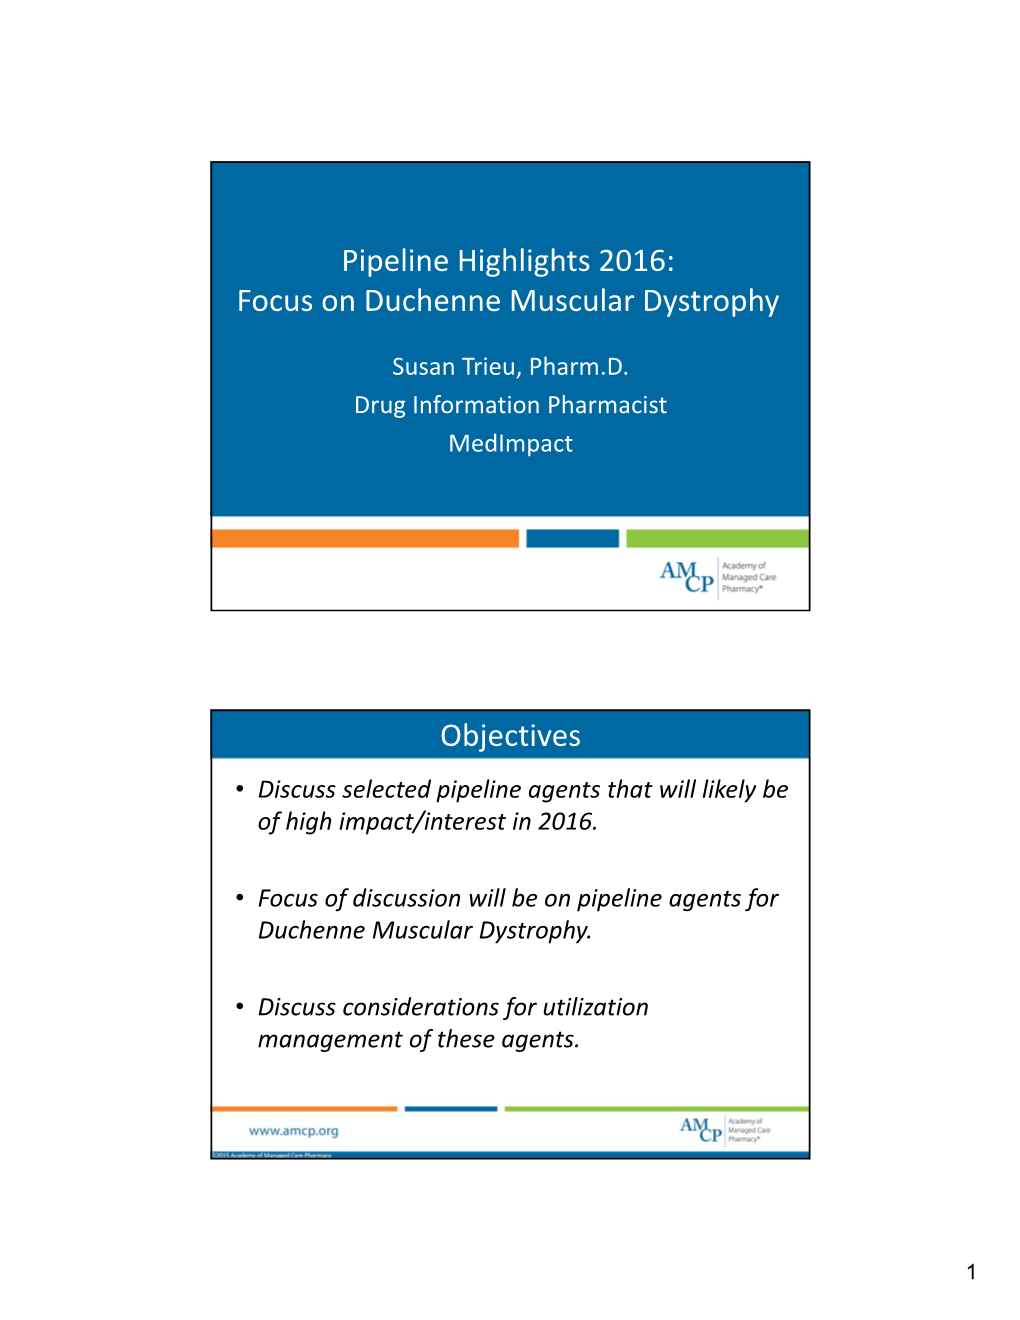 Pipeline Highlights 2016: Focus on Duchenne Muscular Dystrophy